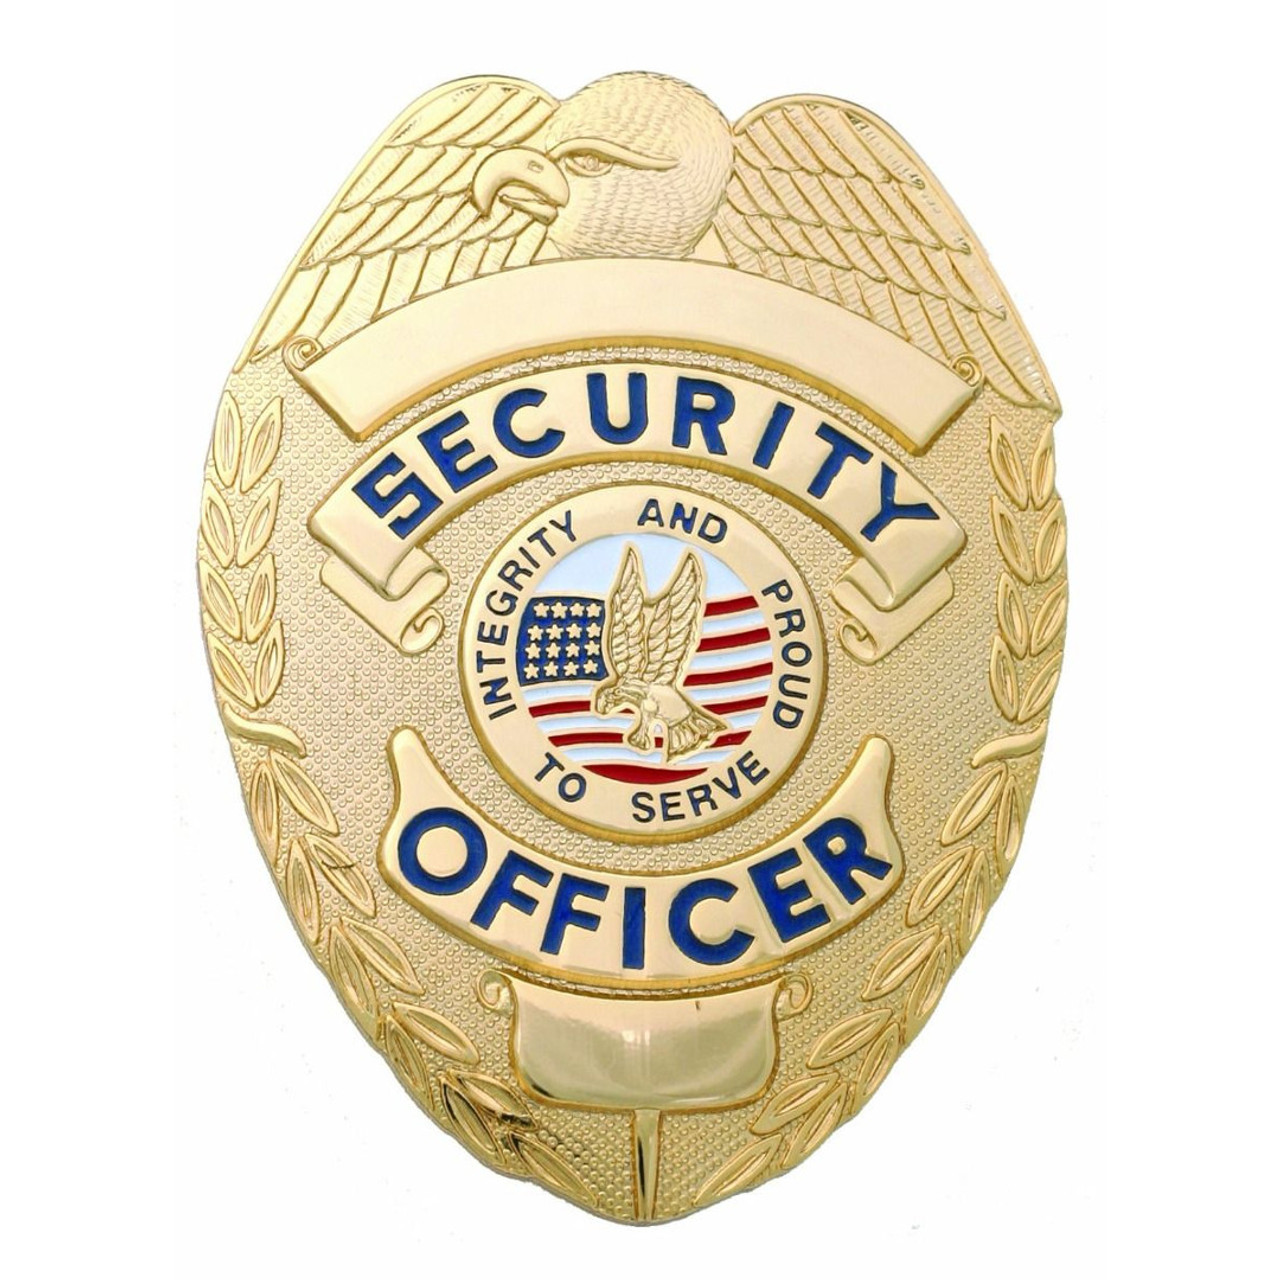 SECURITY OFFICER SILVER SHIELD BADGE